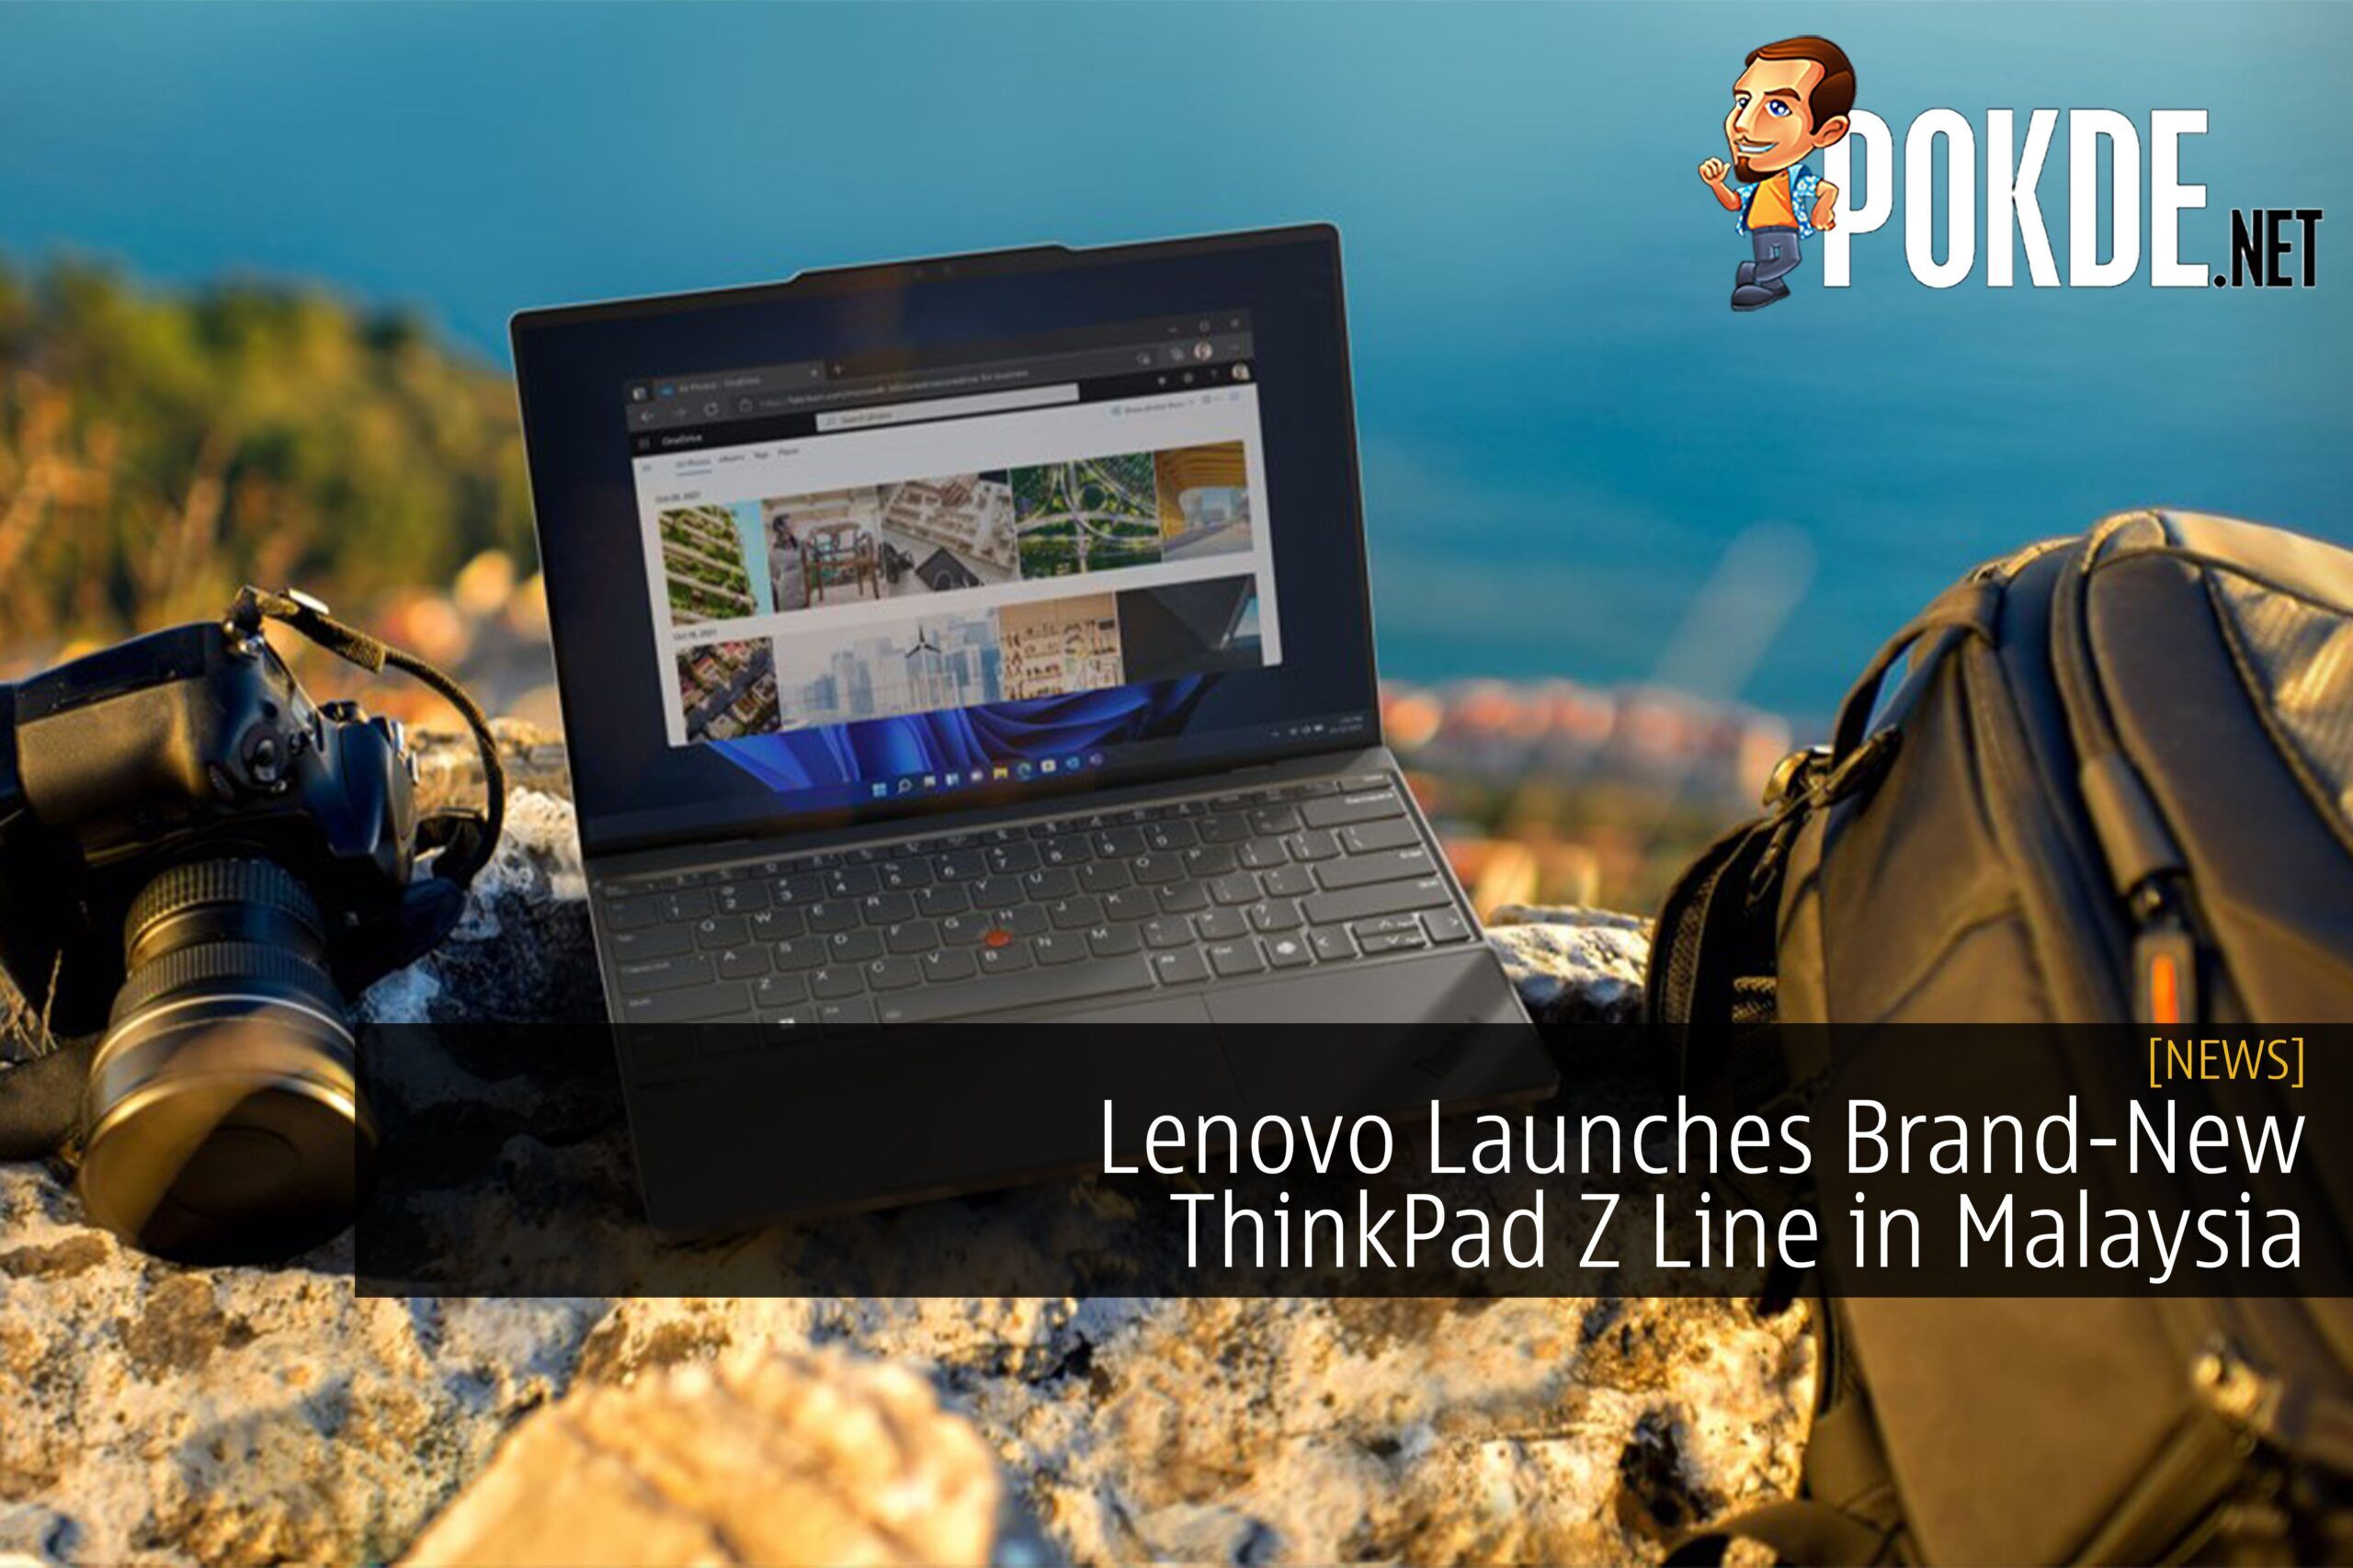 Lenovo Launches Brand-New ThinkPad Z Line in Malaysia